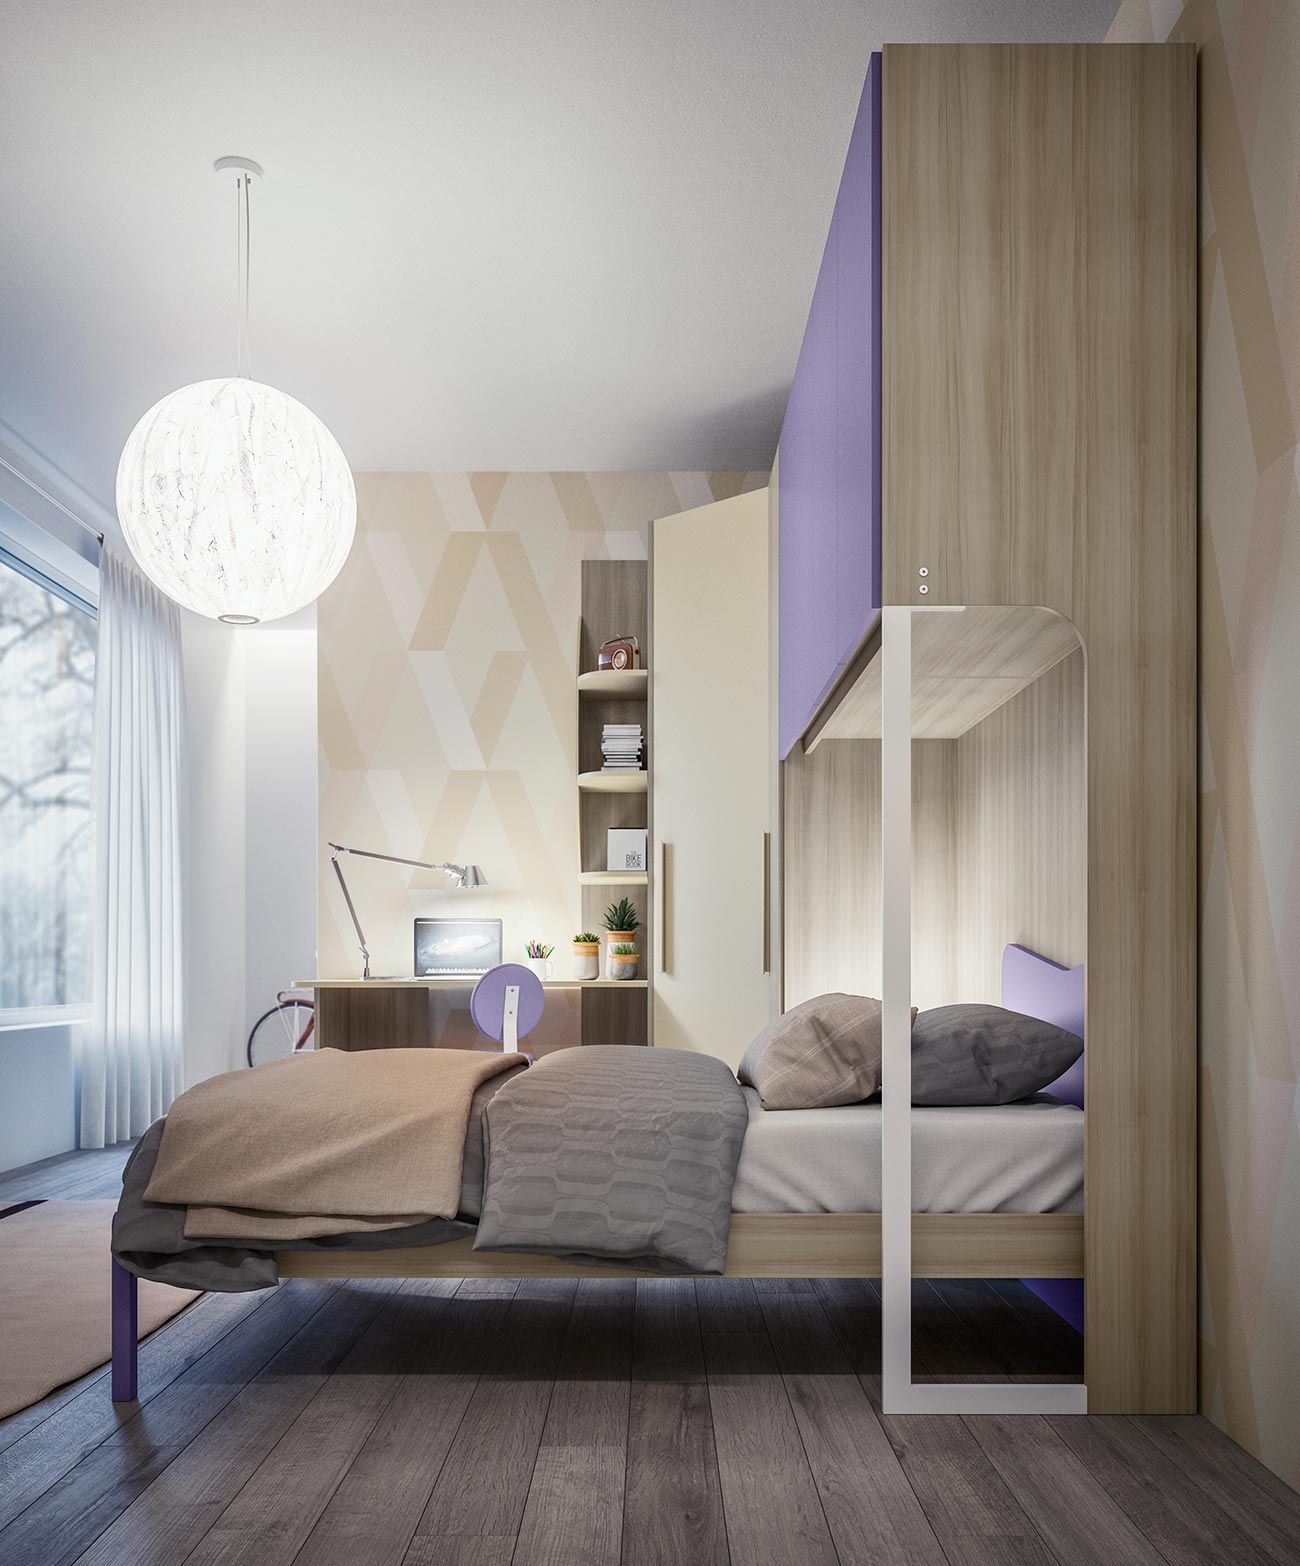 Bedrooms with over-bed storage with moulded side panel